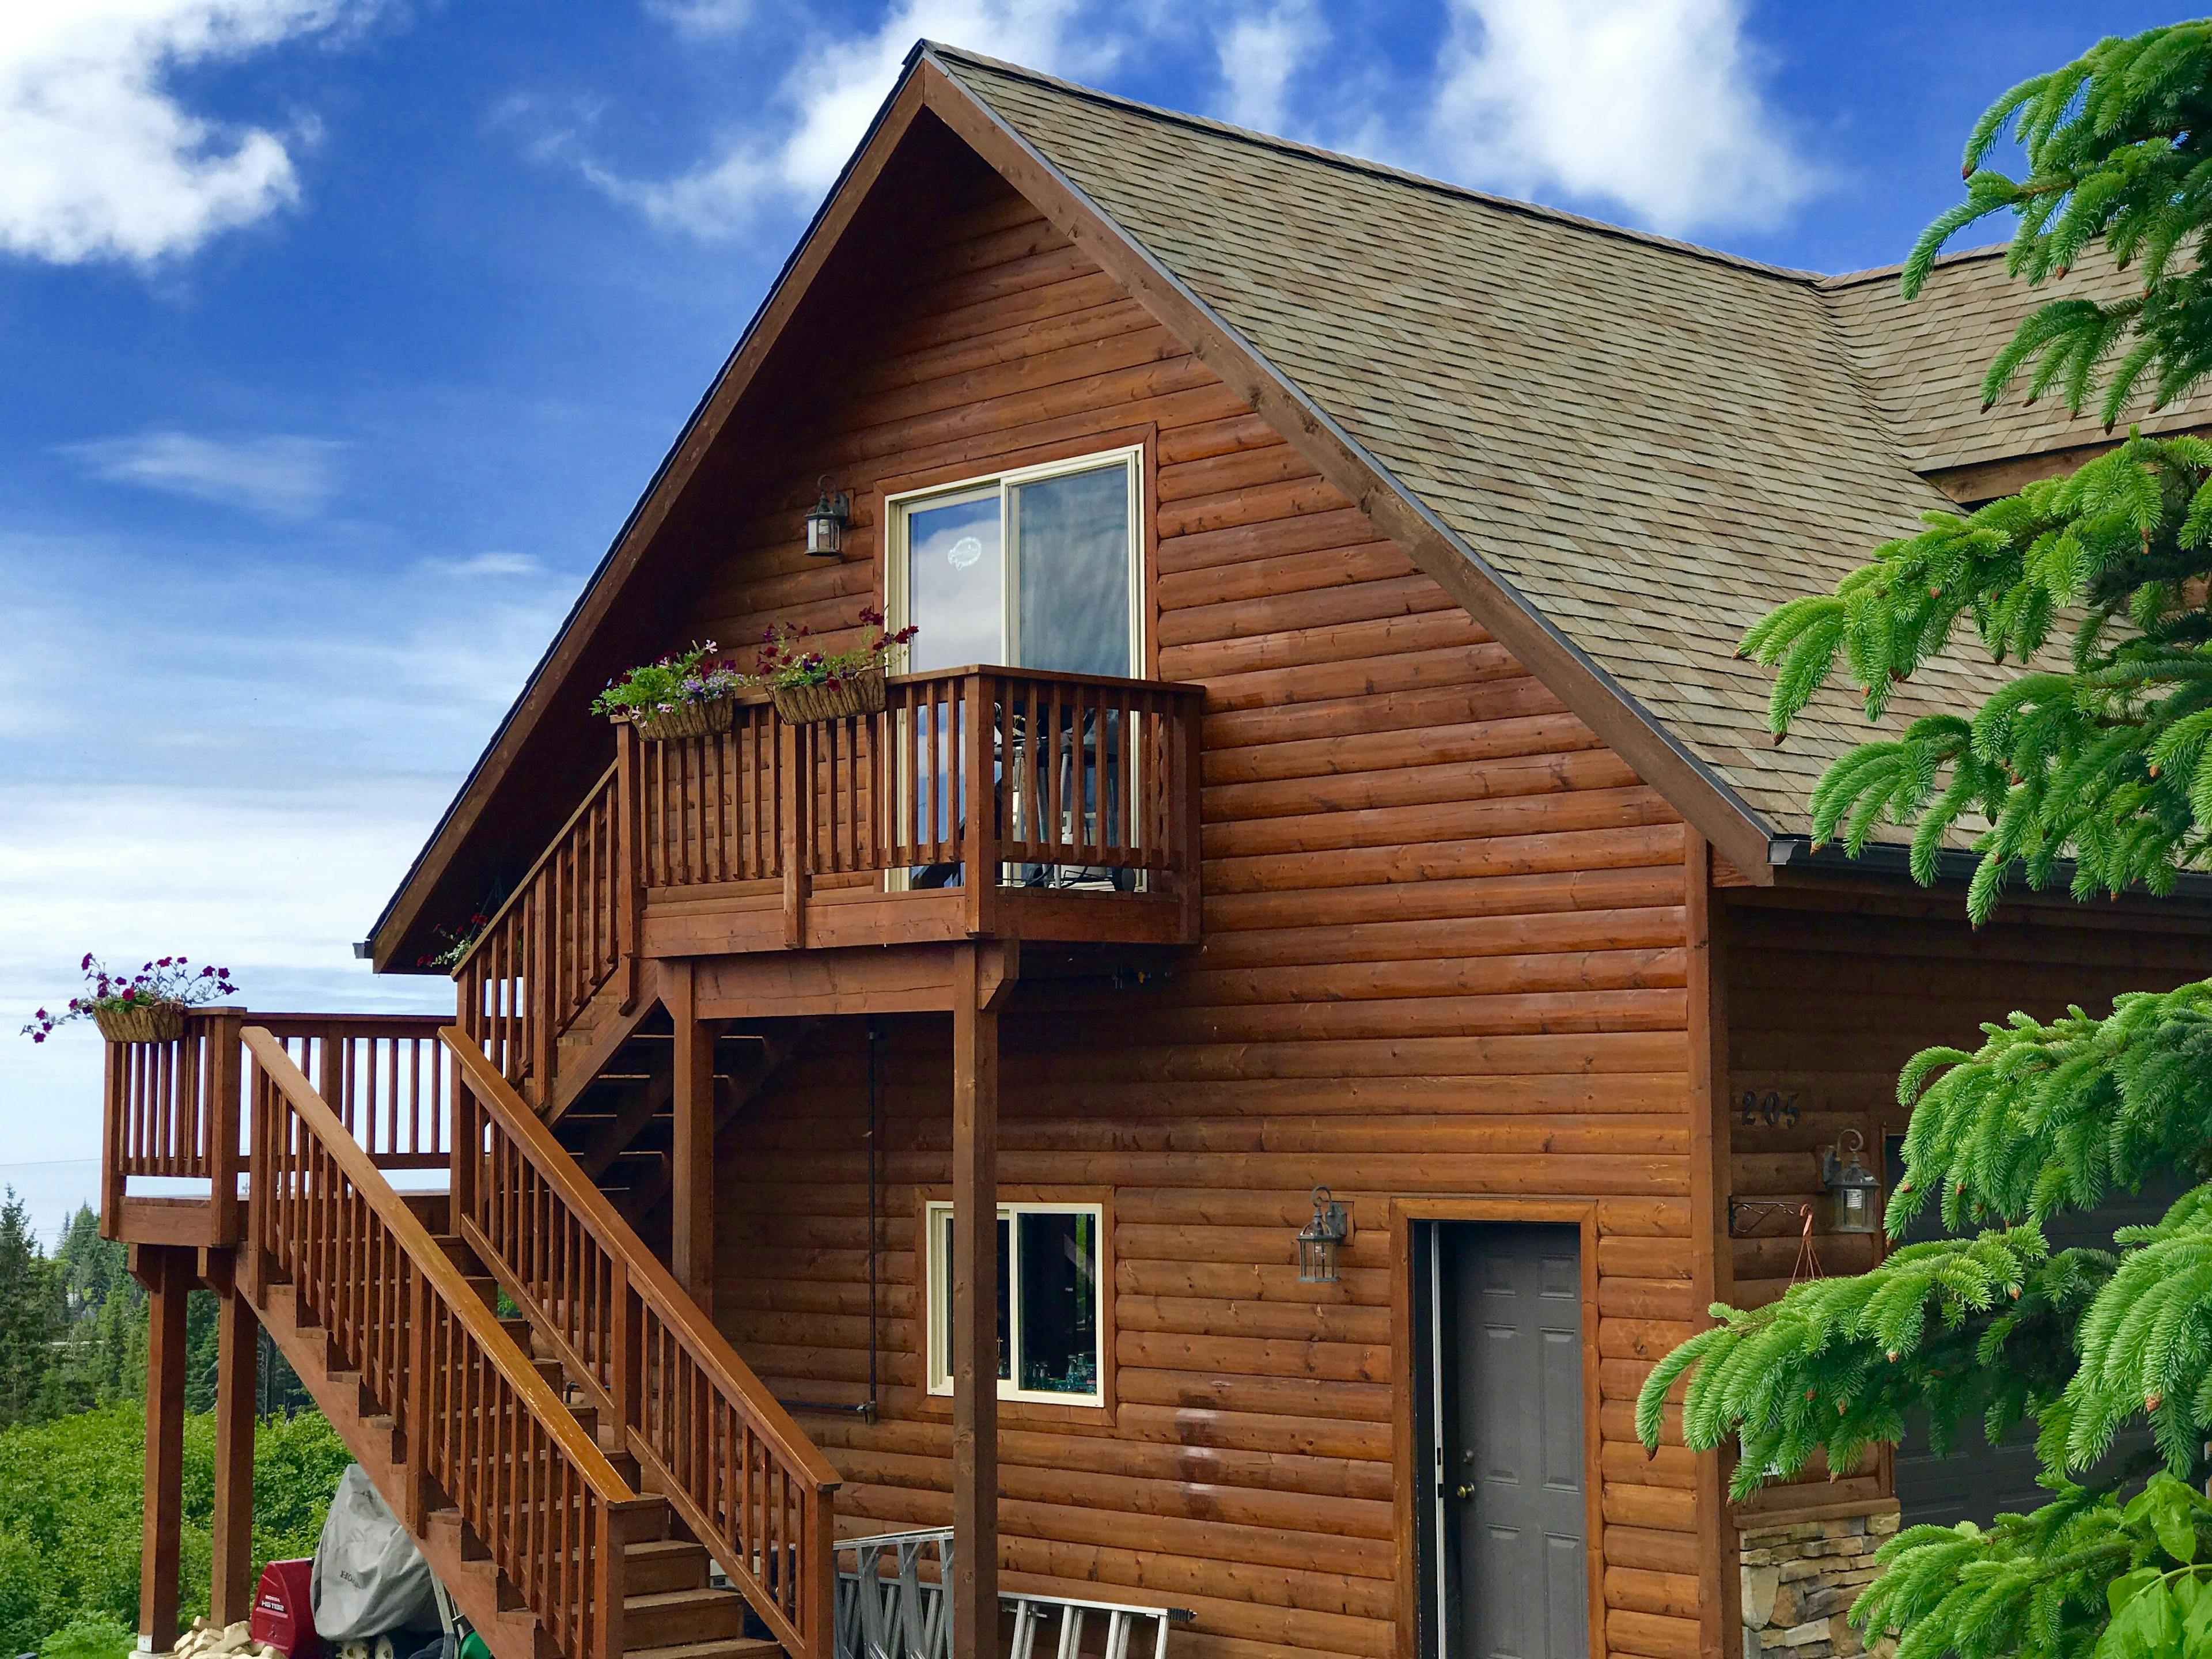 Exterior of two story log home with exterior stairs, trees, and bright blue sky